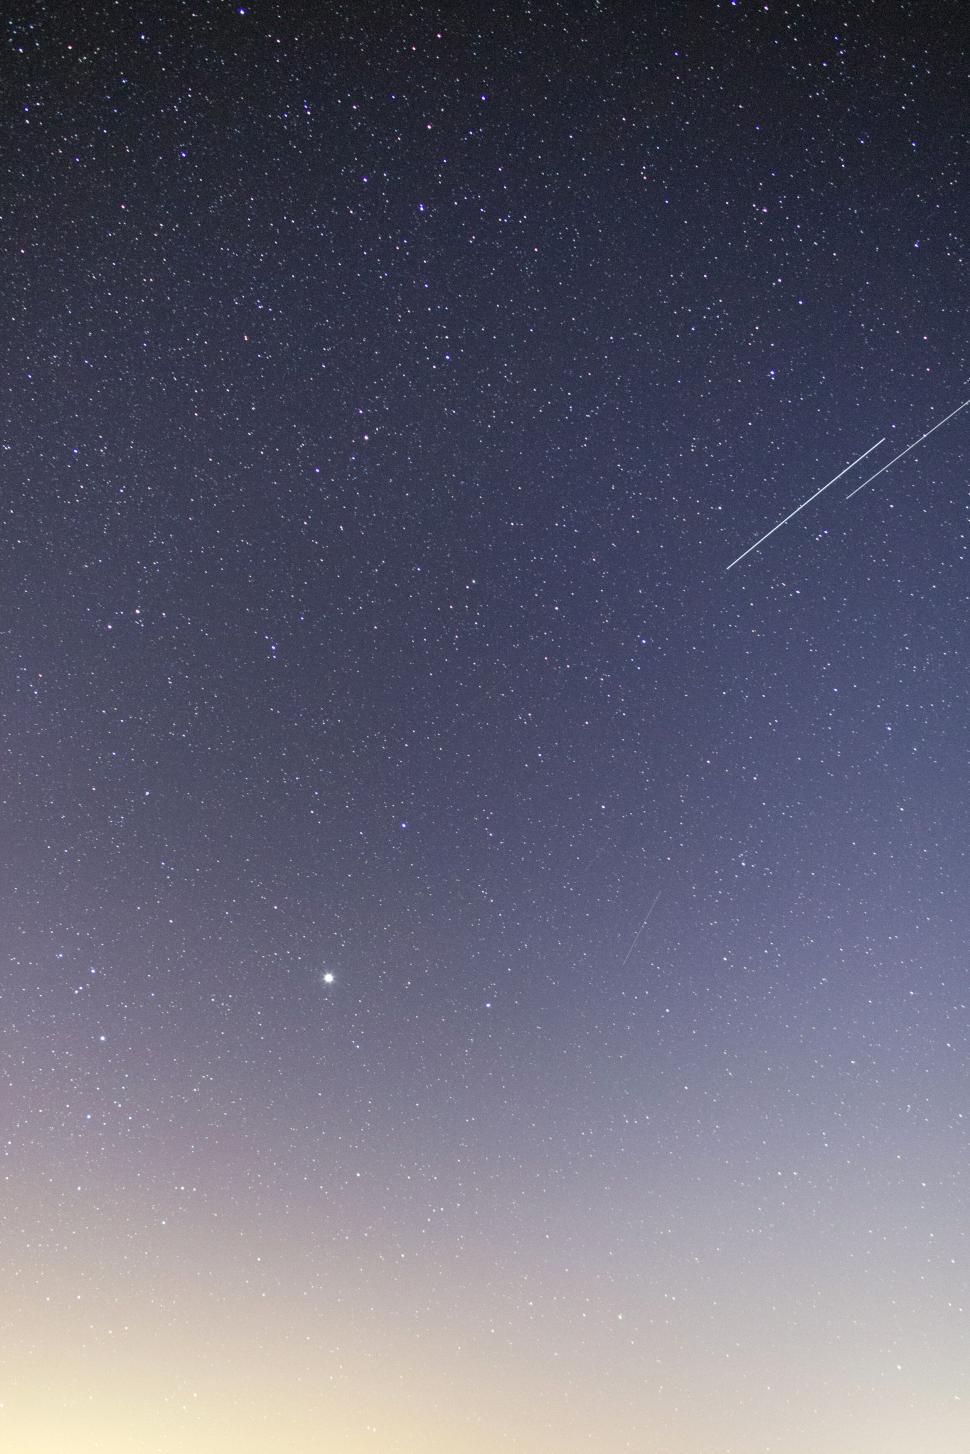 Free Image of Star-studded sky with visible meteor trails 